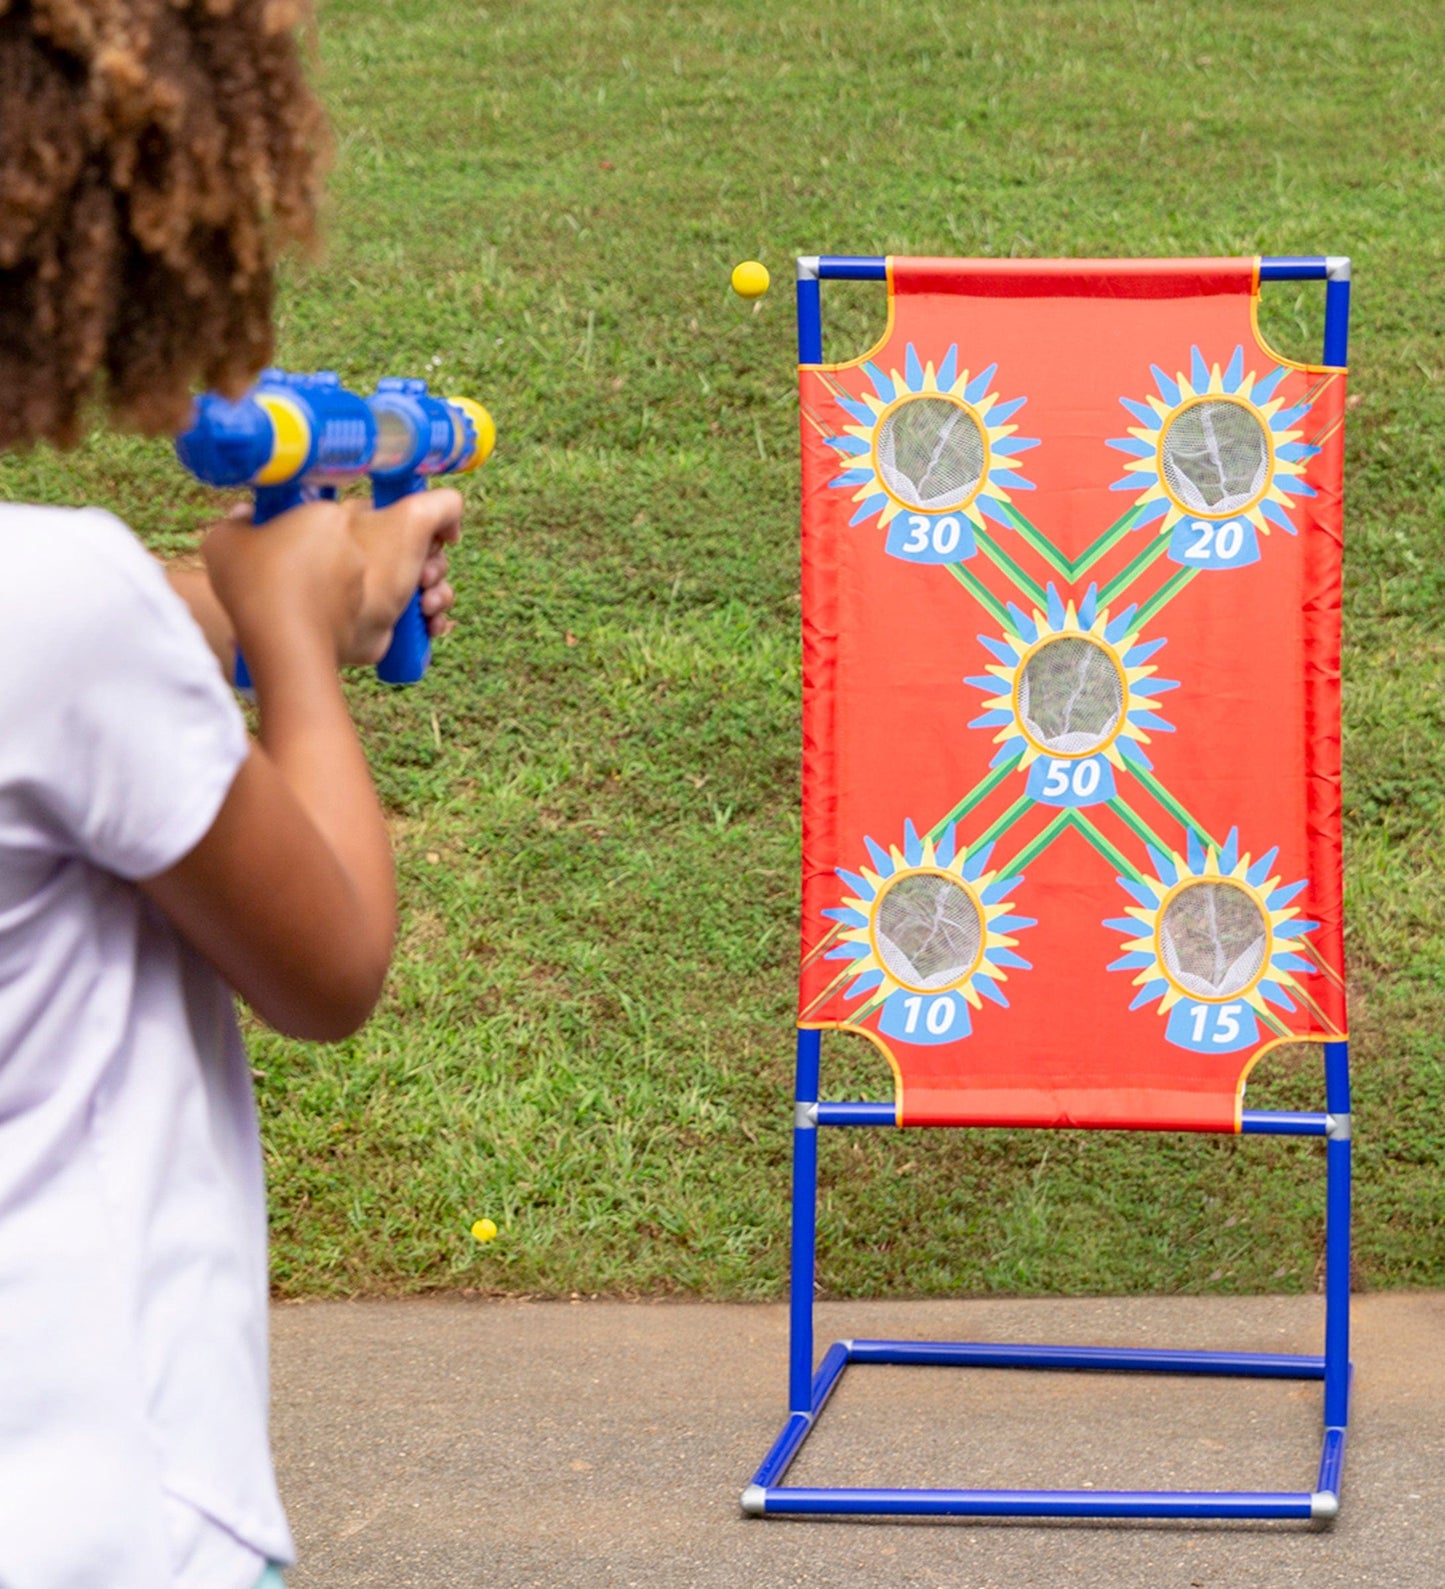 Target Blaster Game Set with 2 Blasters and 24 Foam Balls